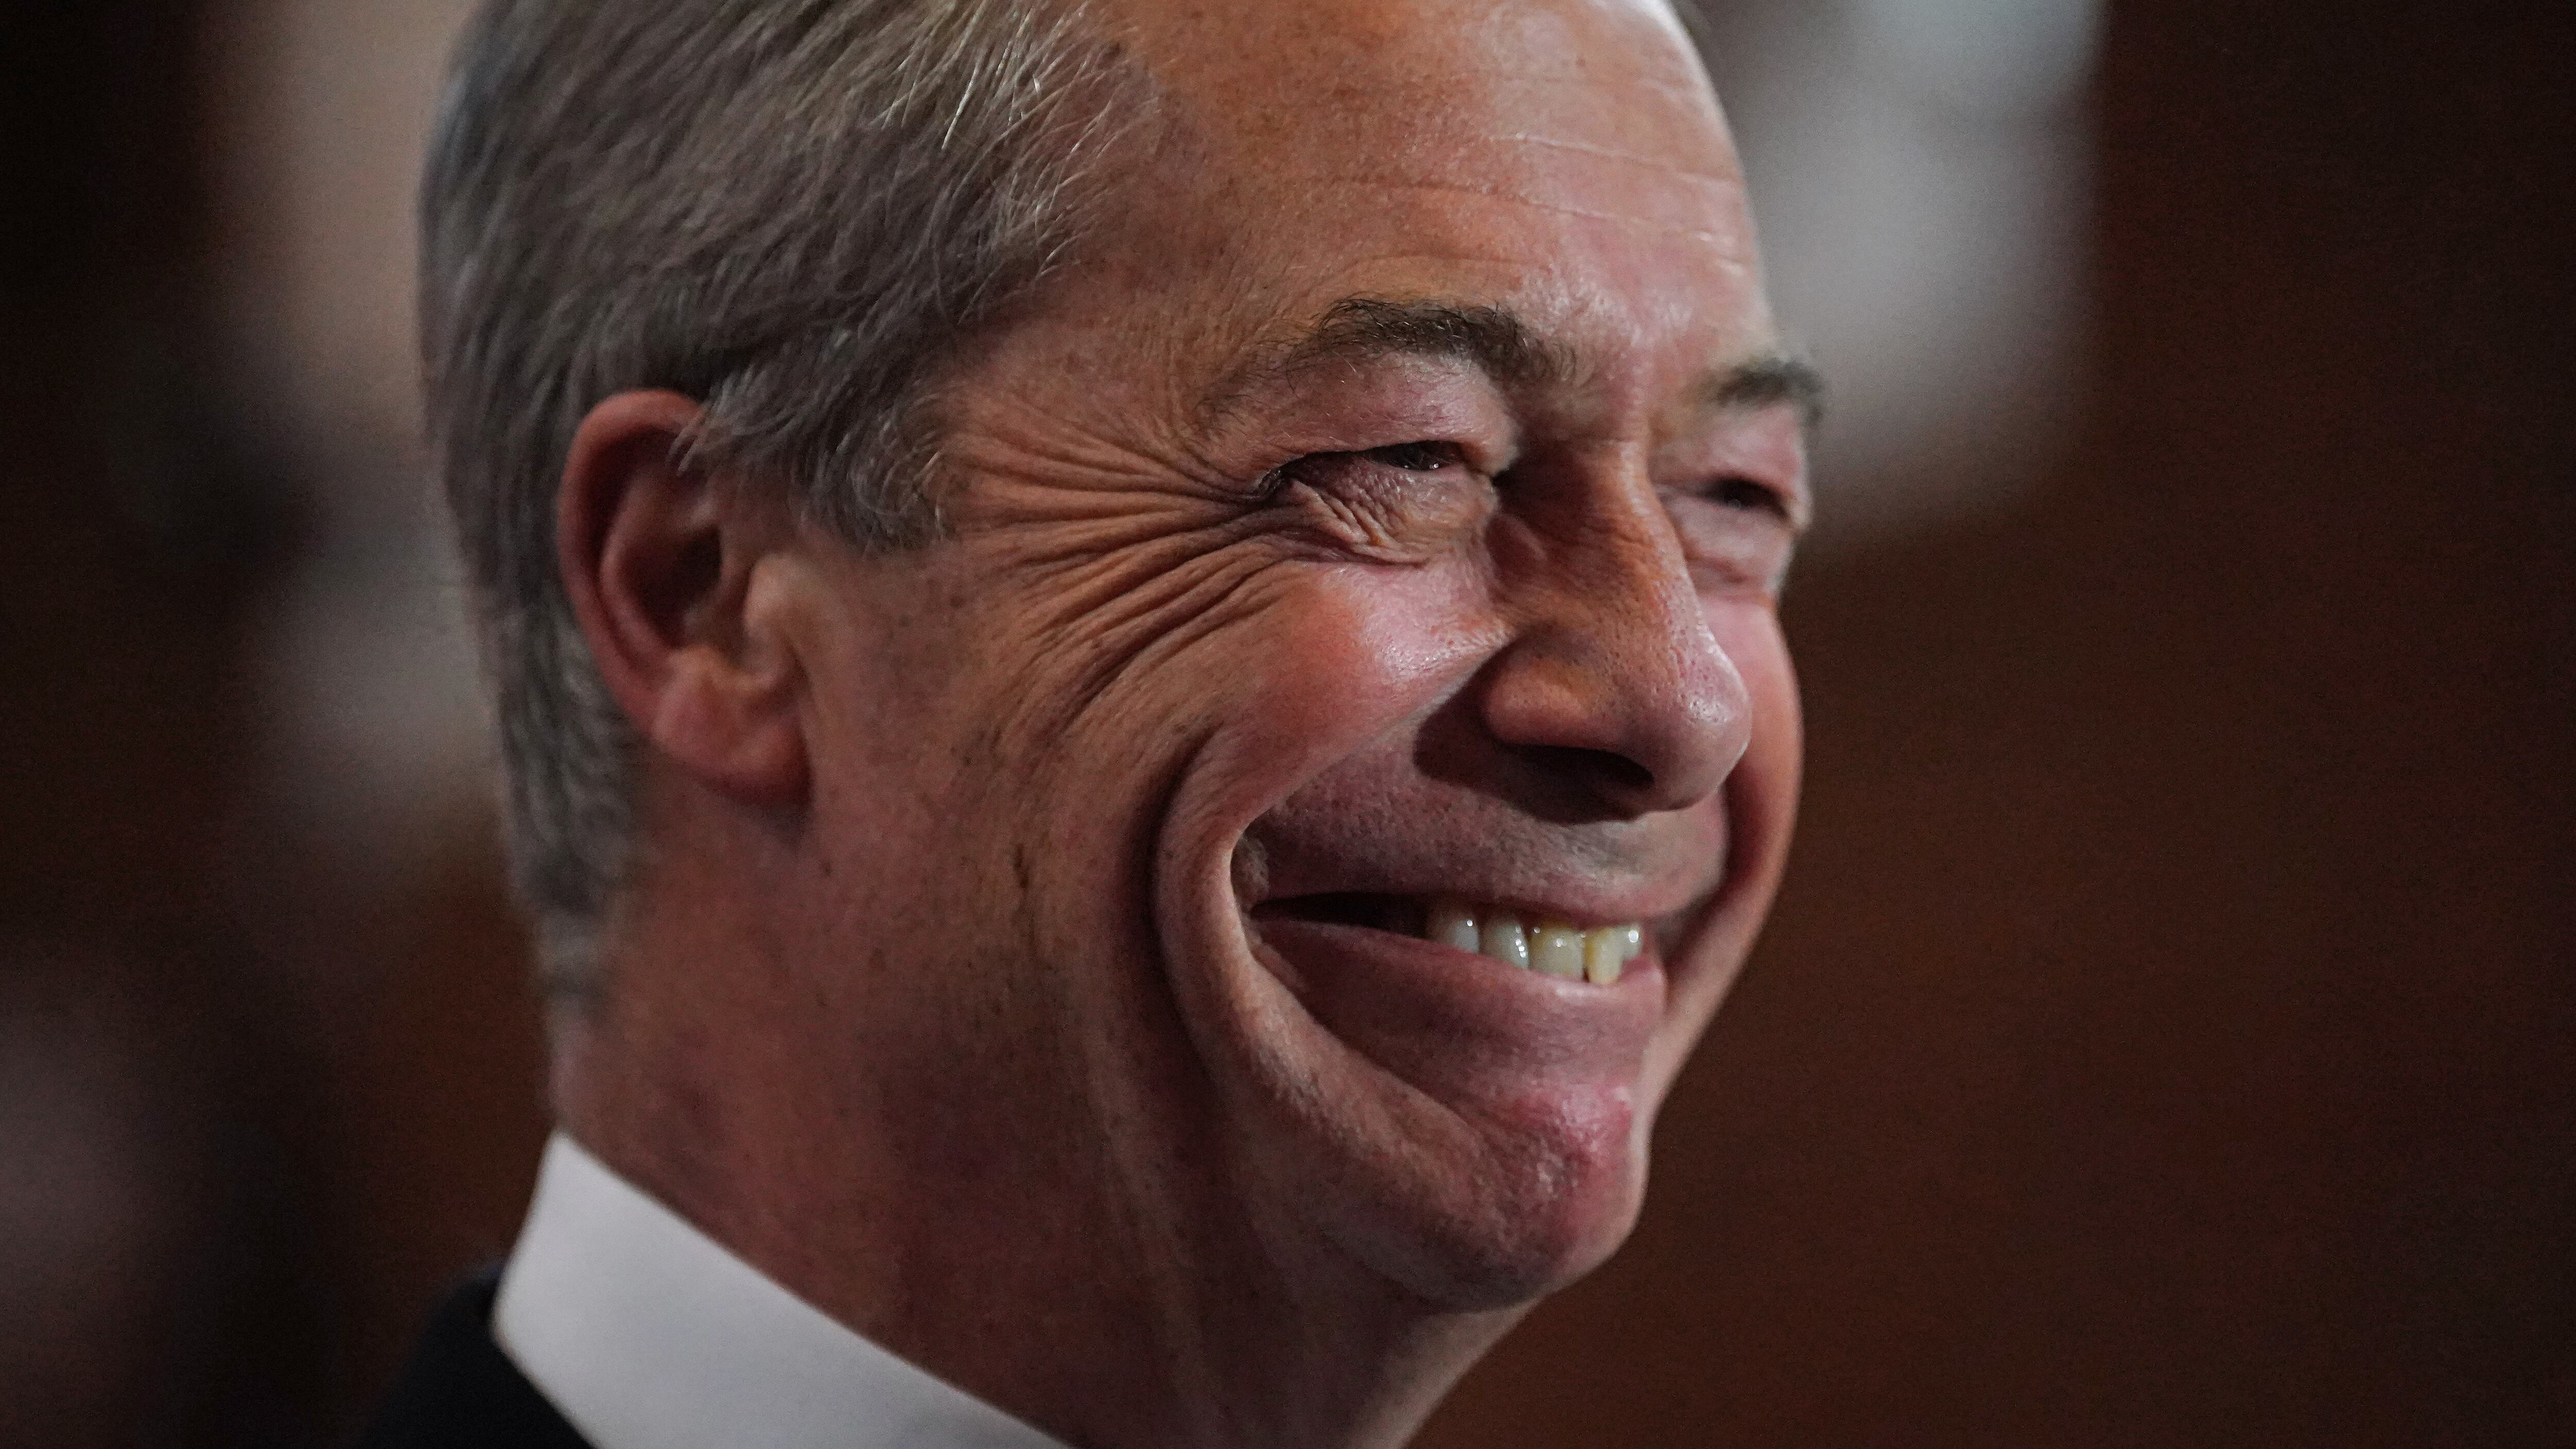 Nigel Farage has revealed he was set to launch a campaign to run as an MP next week